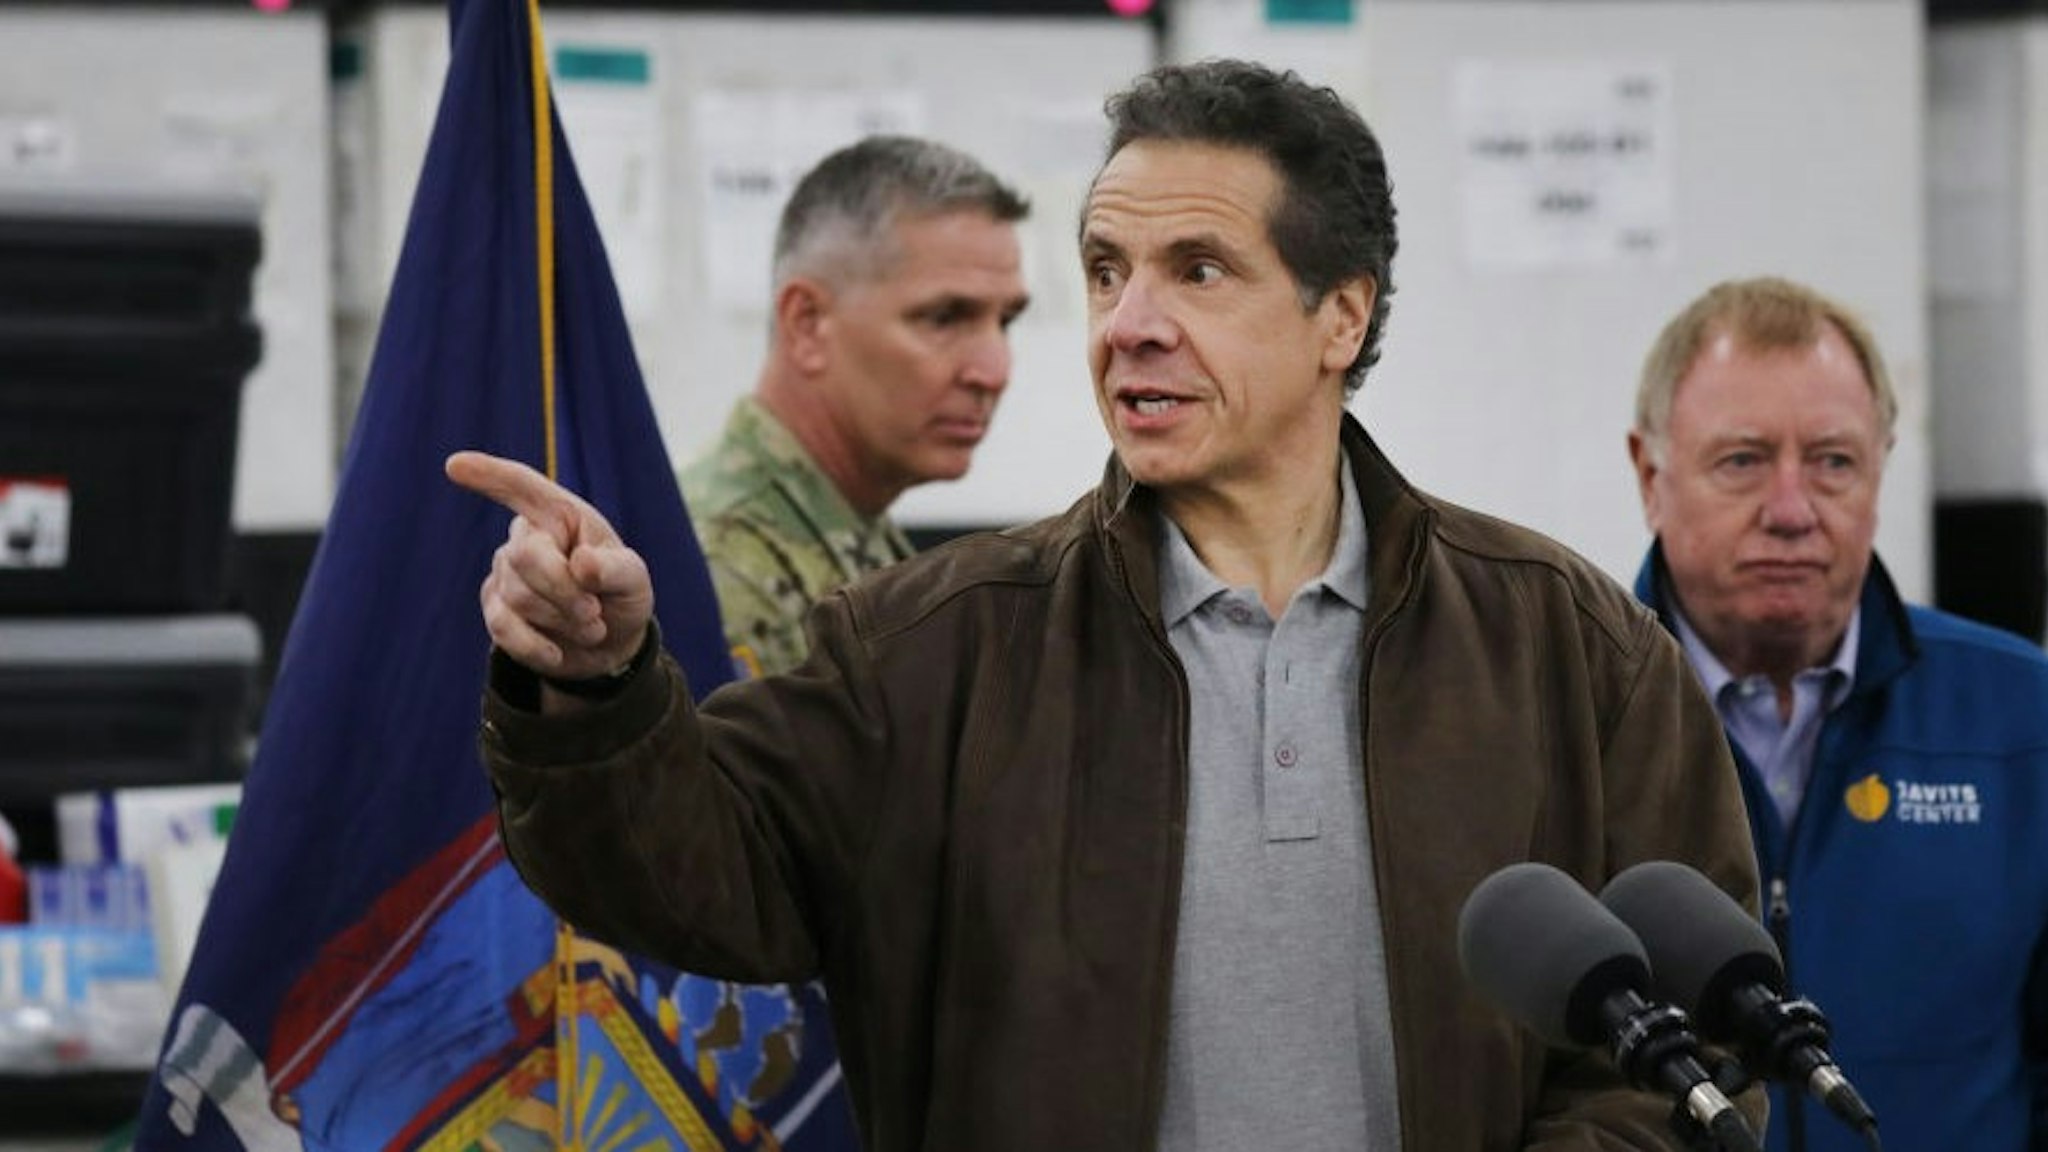 NEW YORK, NEW YORK - MARCH 23: New York Governor Andrew Cuomo speaks to the media and members of the National Guard at the Javits Convention Center which is being turned into a hospital to help fight coronavirus cases on March 23, 2020 in New York City. The plan is part of his New York state request for assistance to the federal government for four field hospital sites and aid from the U.S. Army Corps of Engineers. New York has been one of the hardest hit states in the nation with over 10,000 cases of COVID-19. (Photo by